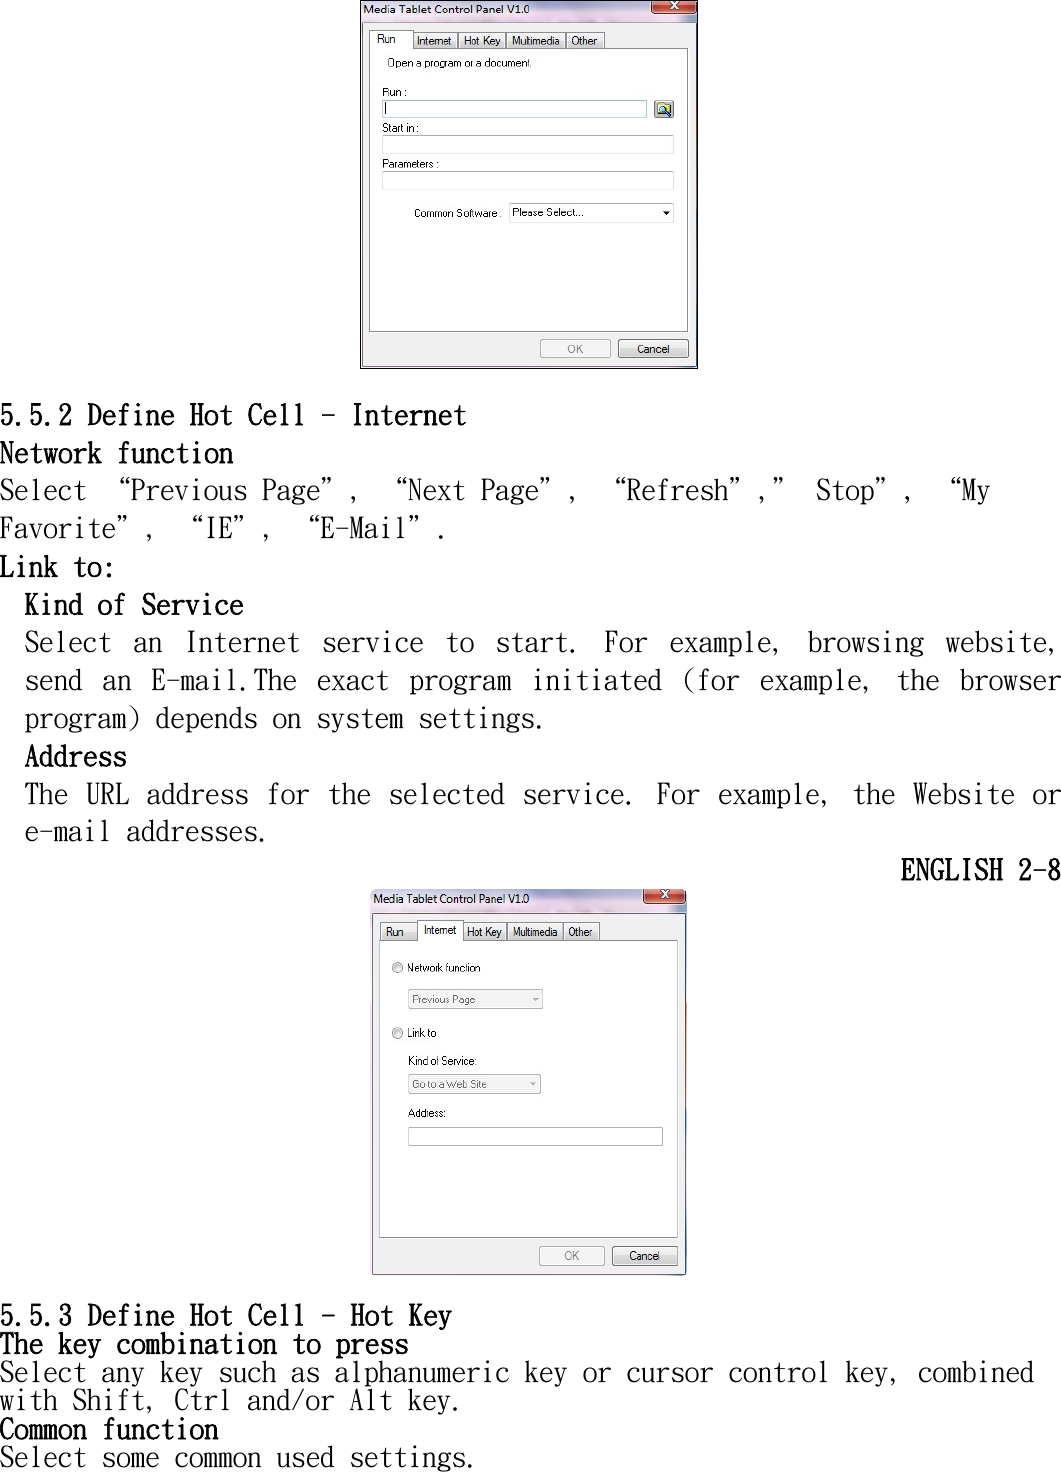     5.5.2 Define Hot Cell - Internet Network function  Select “Previous Page＂, “Next Page＂, “Refresh＂,＂ Stop＂, “My Favorite＂, “IE＂, “E-Mail＂. Link to: Kind of Service Select  an  Internet  service  to  start.  For  example,  browsing  website, send  an  E-mail.The  exact  program  initiated  (for  example,  the  browser program) depends on system settings. Address The URL address for the selected service. For example, the Website or e-mail addresses. ENGLISH 2-8   5.5.3 Define Hot Cell - Hot Key The key combination to press  Select any key such as alphanumeric key or cursor control key, combined with Shift, Ctrl and/or Alt key. Common function  Select some common used settings. 